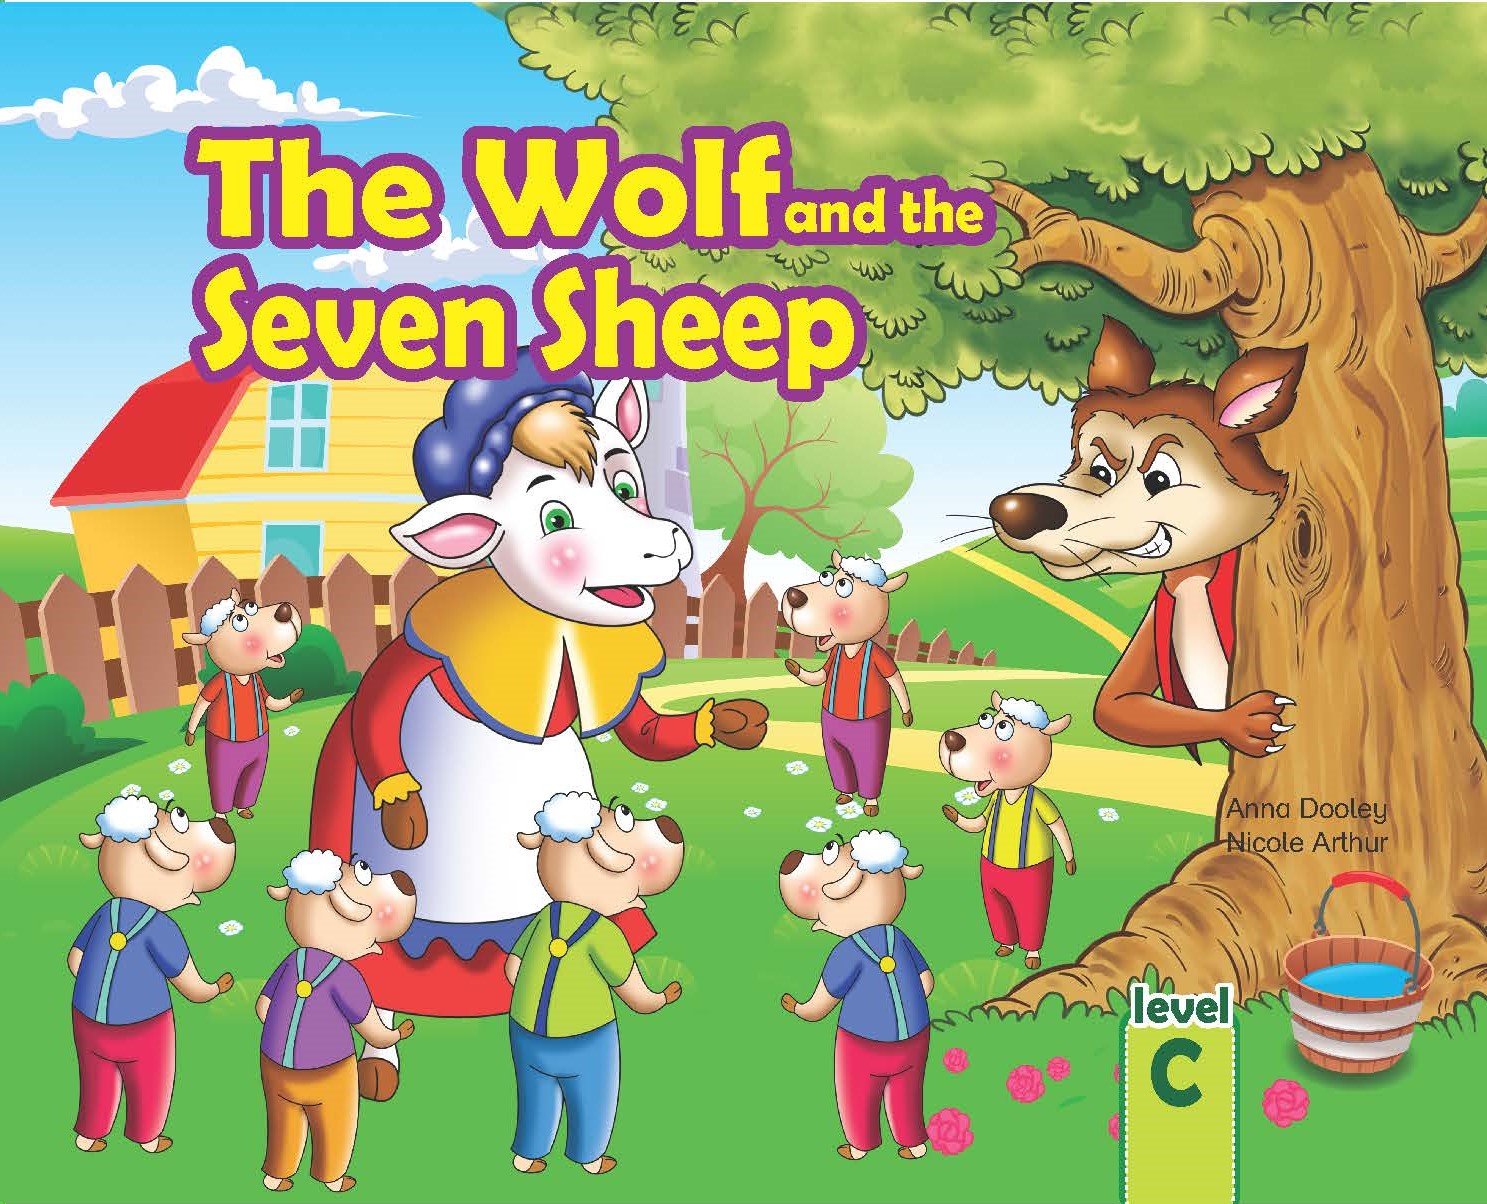 The Wolf and the Seven Sheep